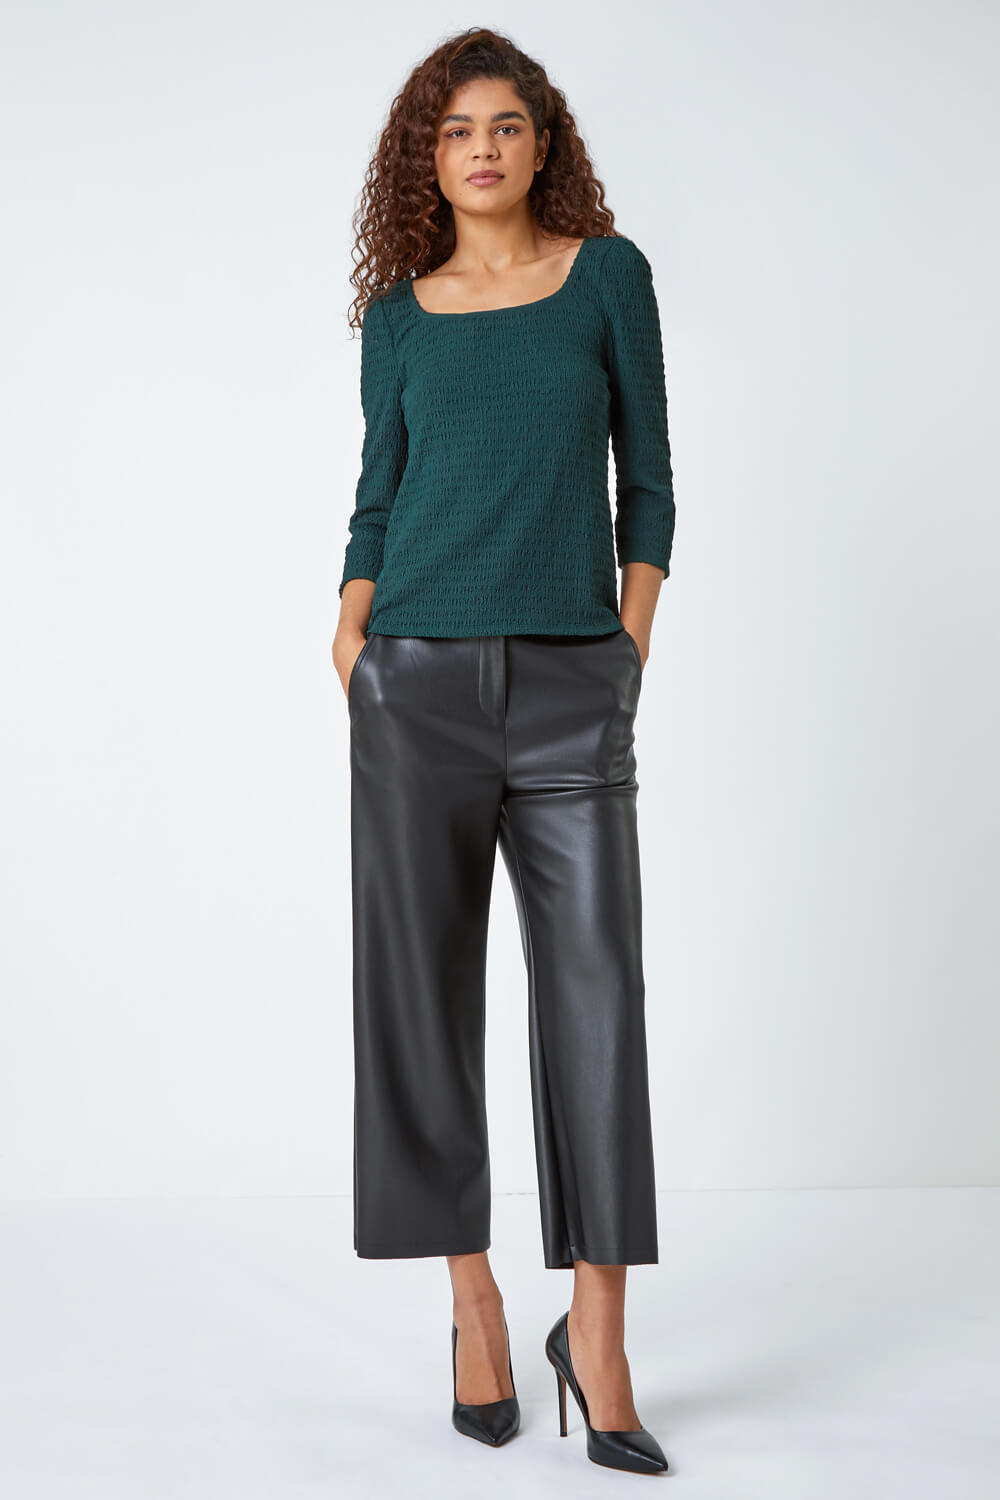 Forest  Textured Ruched Stretch Top, Image 2 of 5